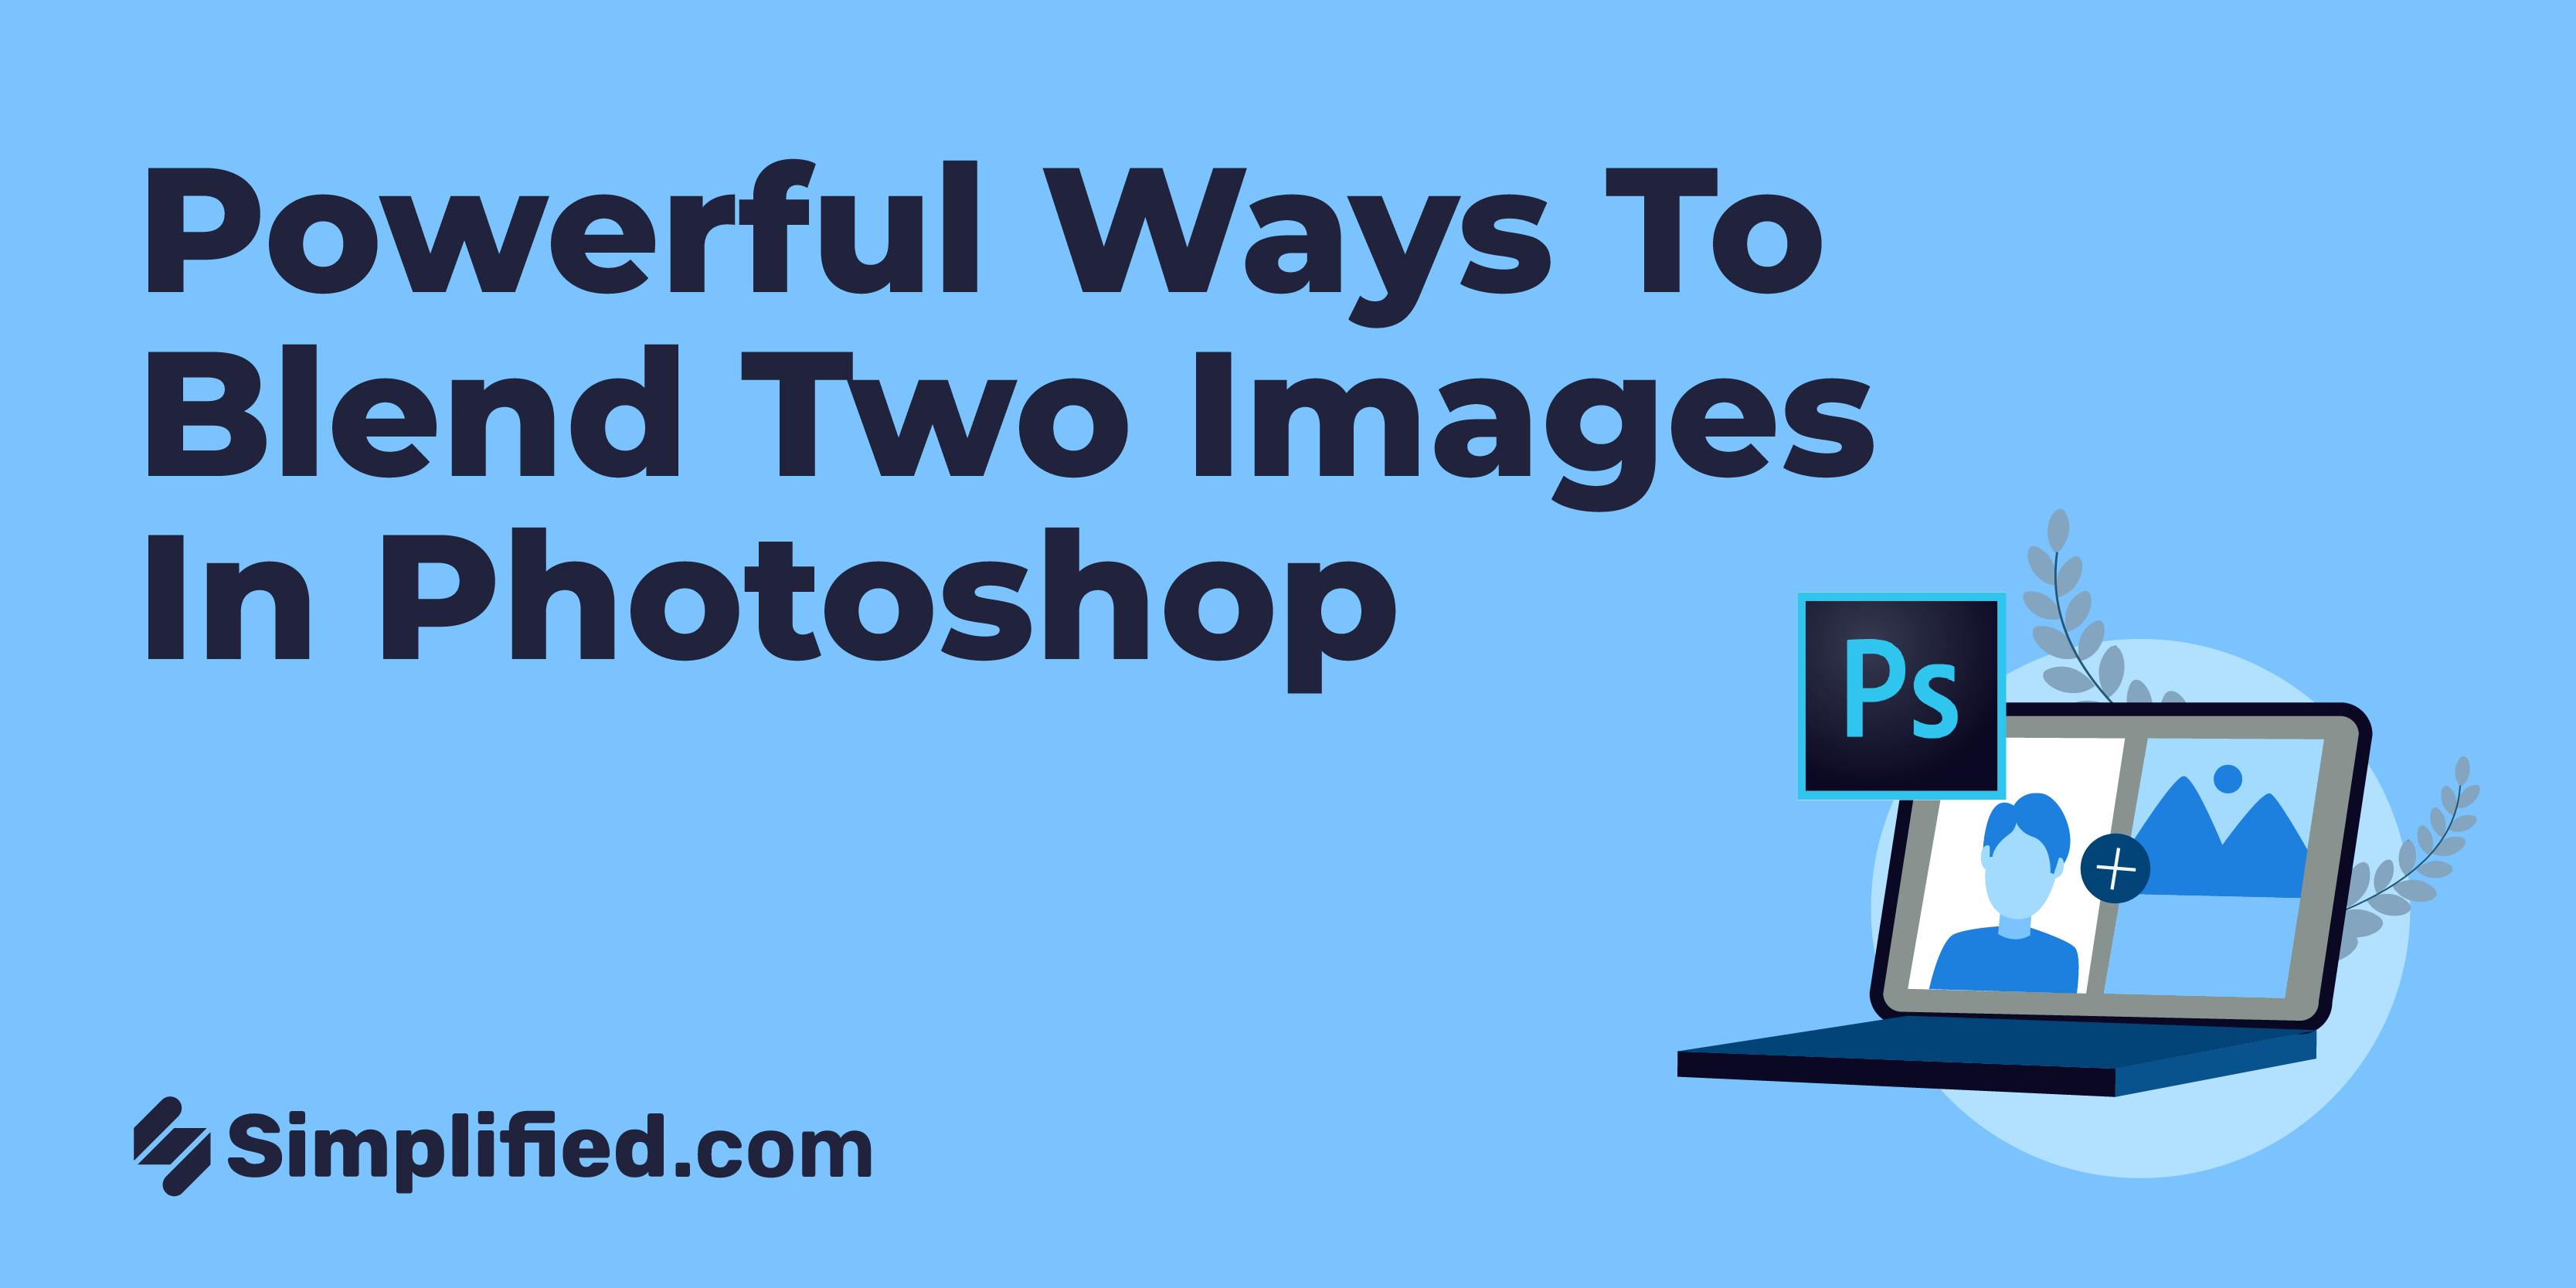 https://siteimages.simplified.com/blog/Powerful-Ways-To-Blend-Two-Images-In-Photoshop-01.png?auto=compress&fm=png